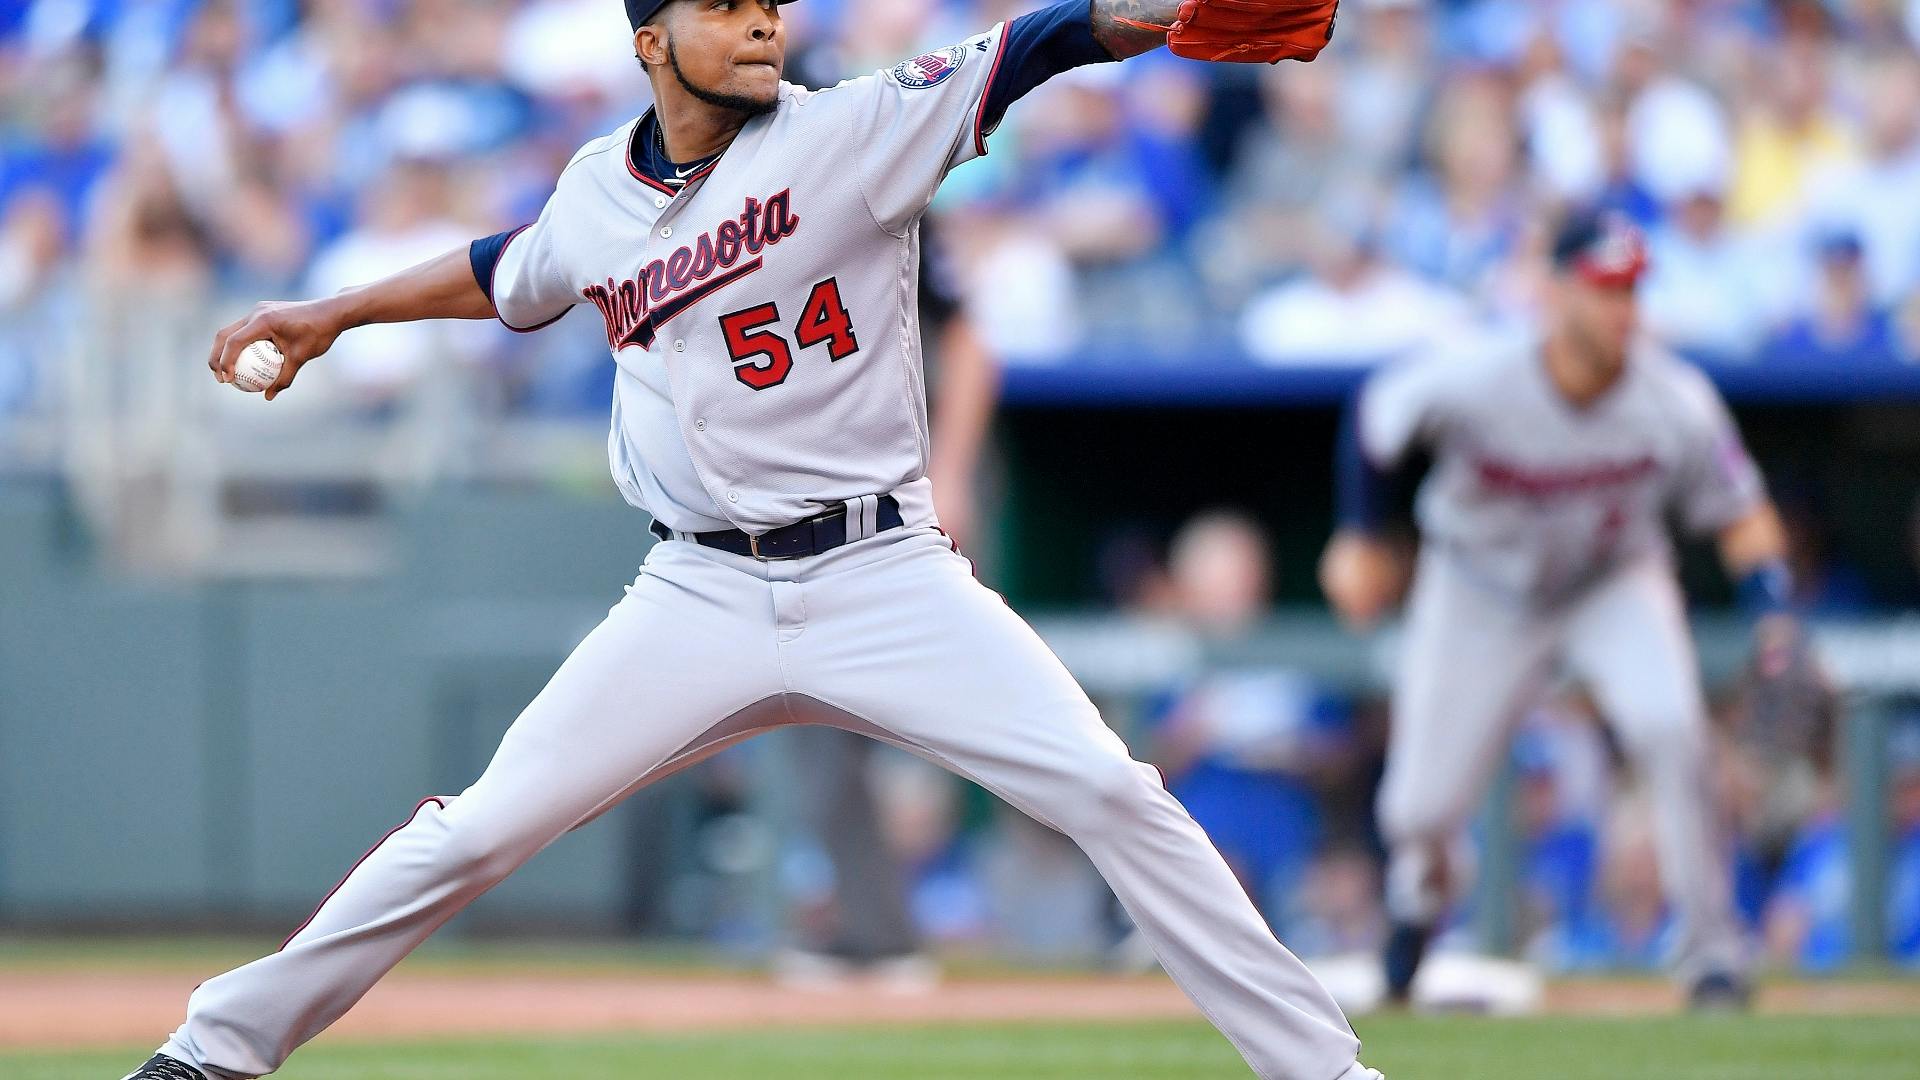 Twins righthander Ervin Santana says going to the 2017 All-Star Game will be even more enjoyable than his appearance in the 2008 game in Yankee Stadium.